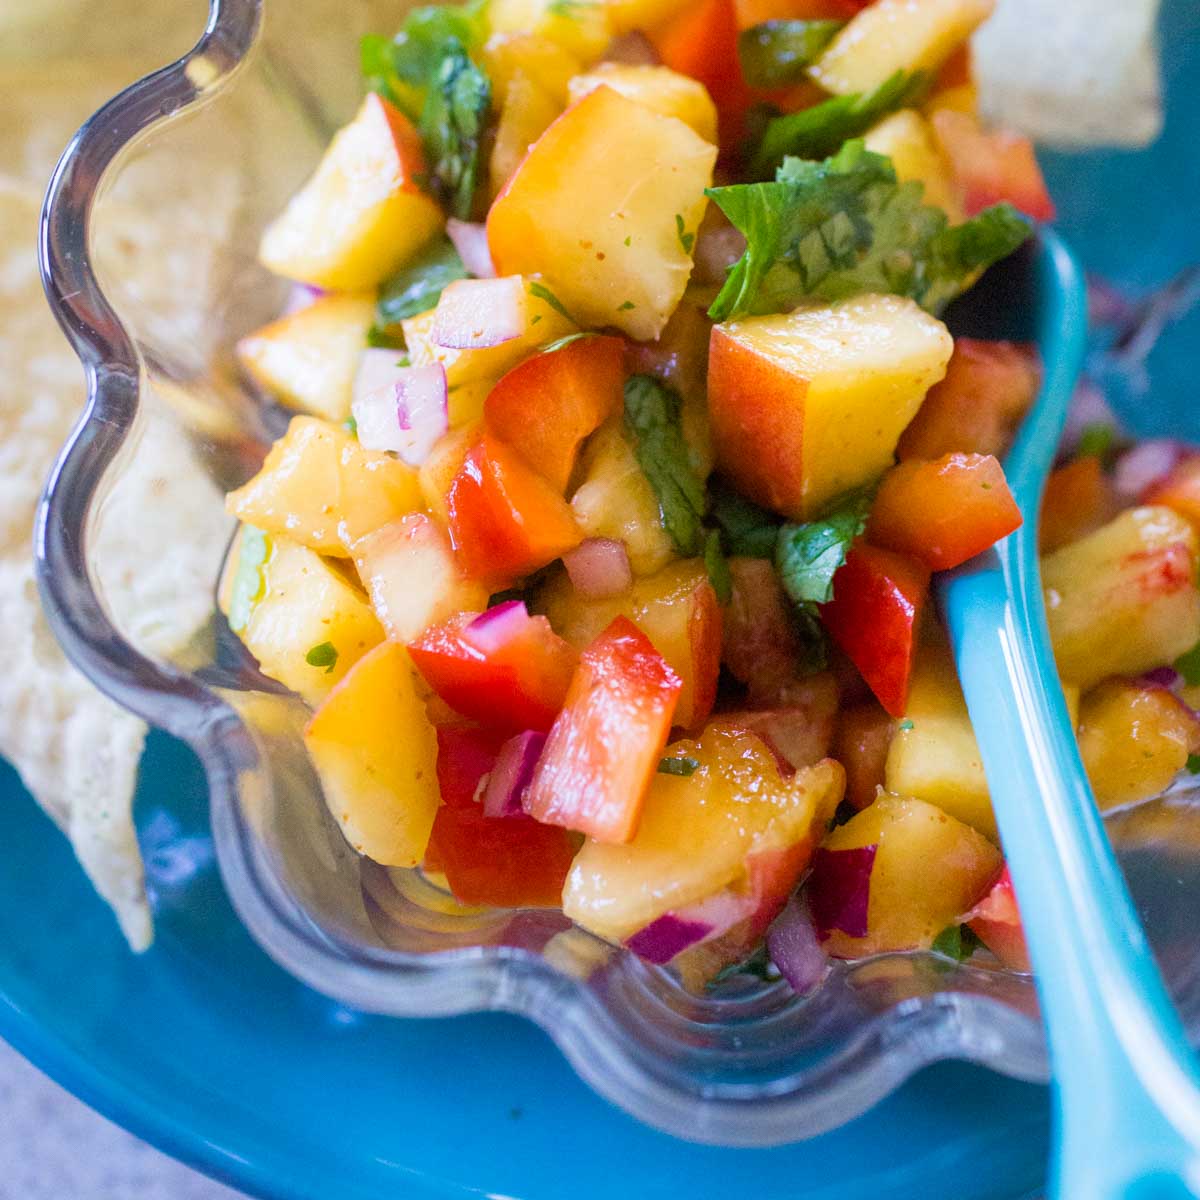 A bowl of homemade chunky peach salsa has a blue spoon for serving.